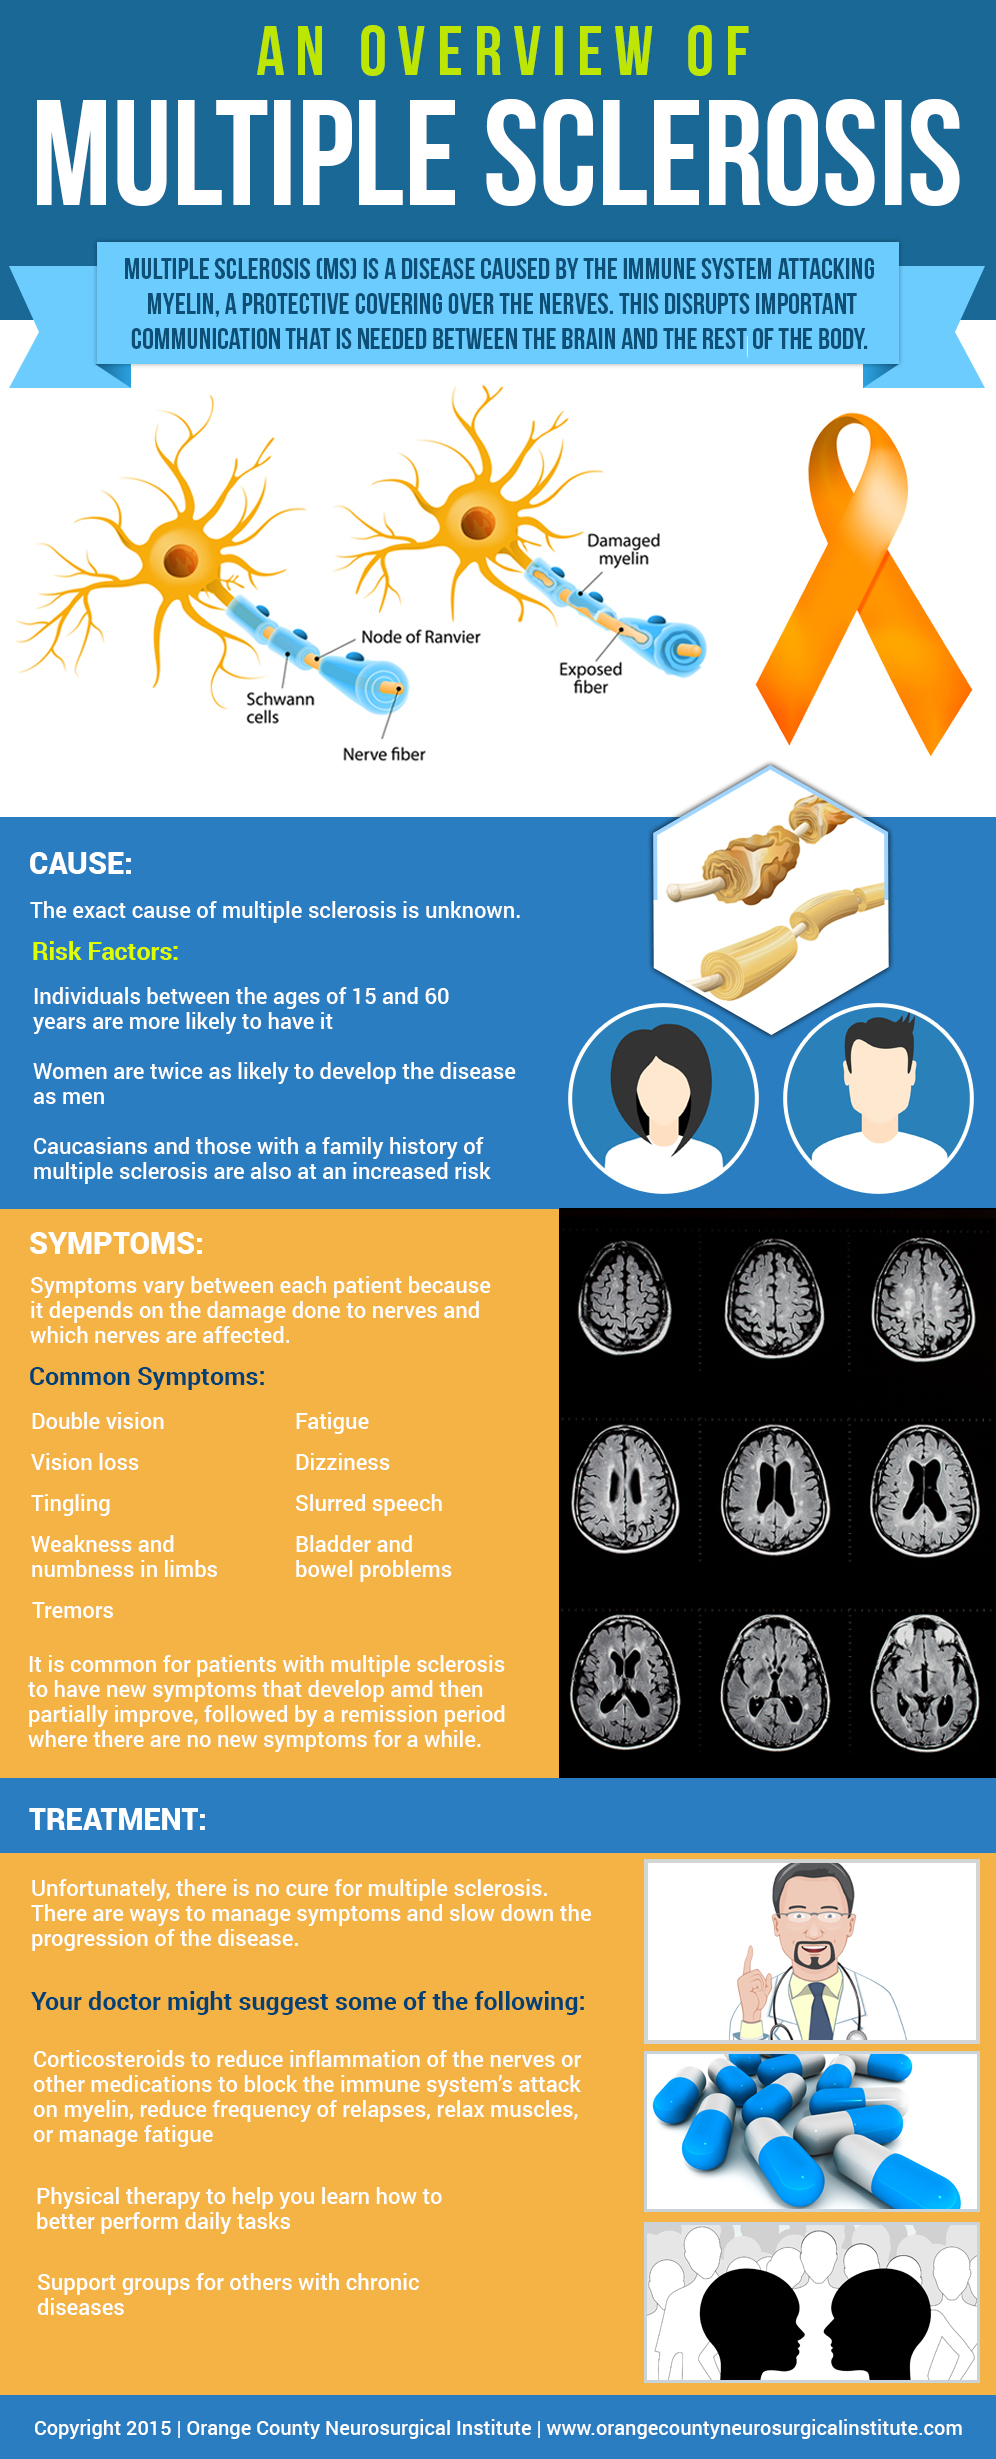 An Overview of Multiple Sclerosis by Orange County Neurosurgical Institute - Infographics